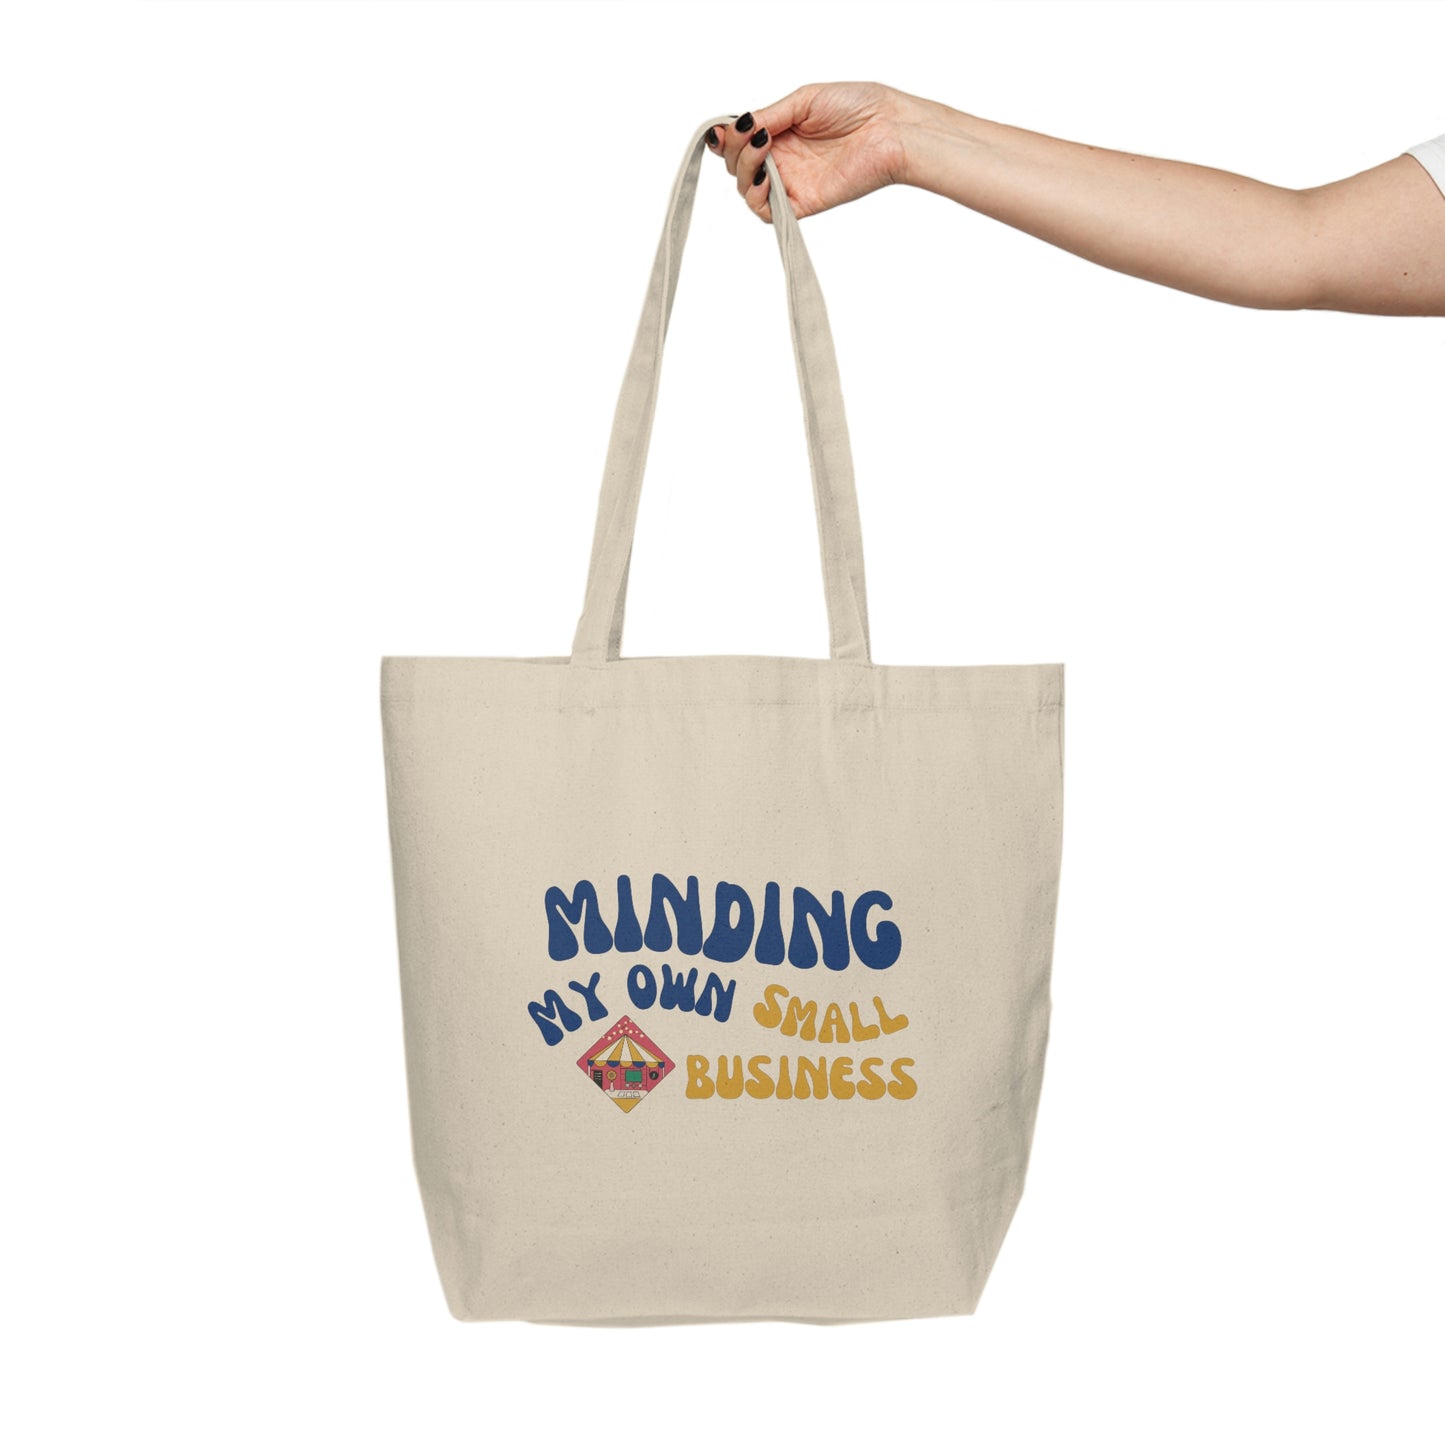 Minding My Own Small Business Tote